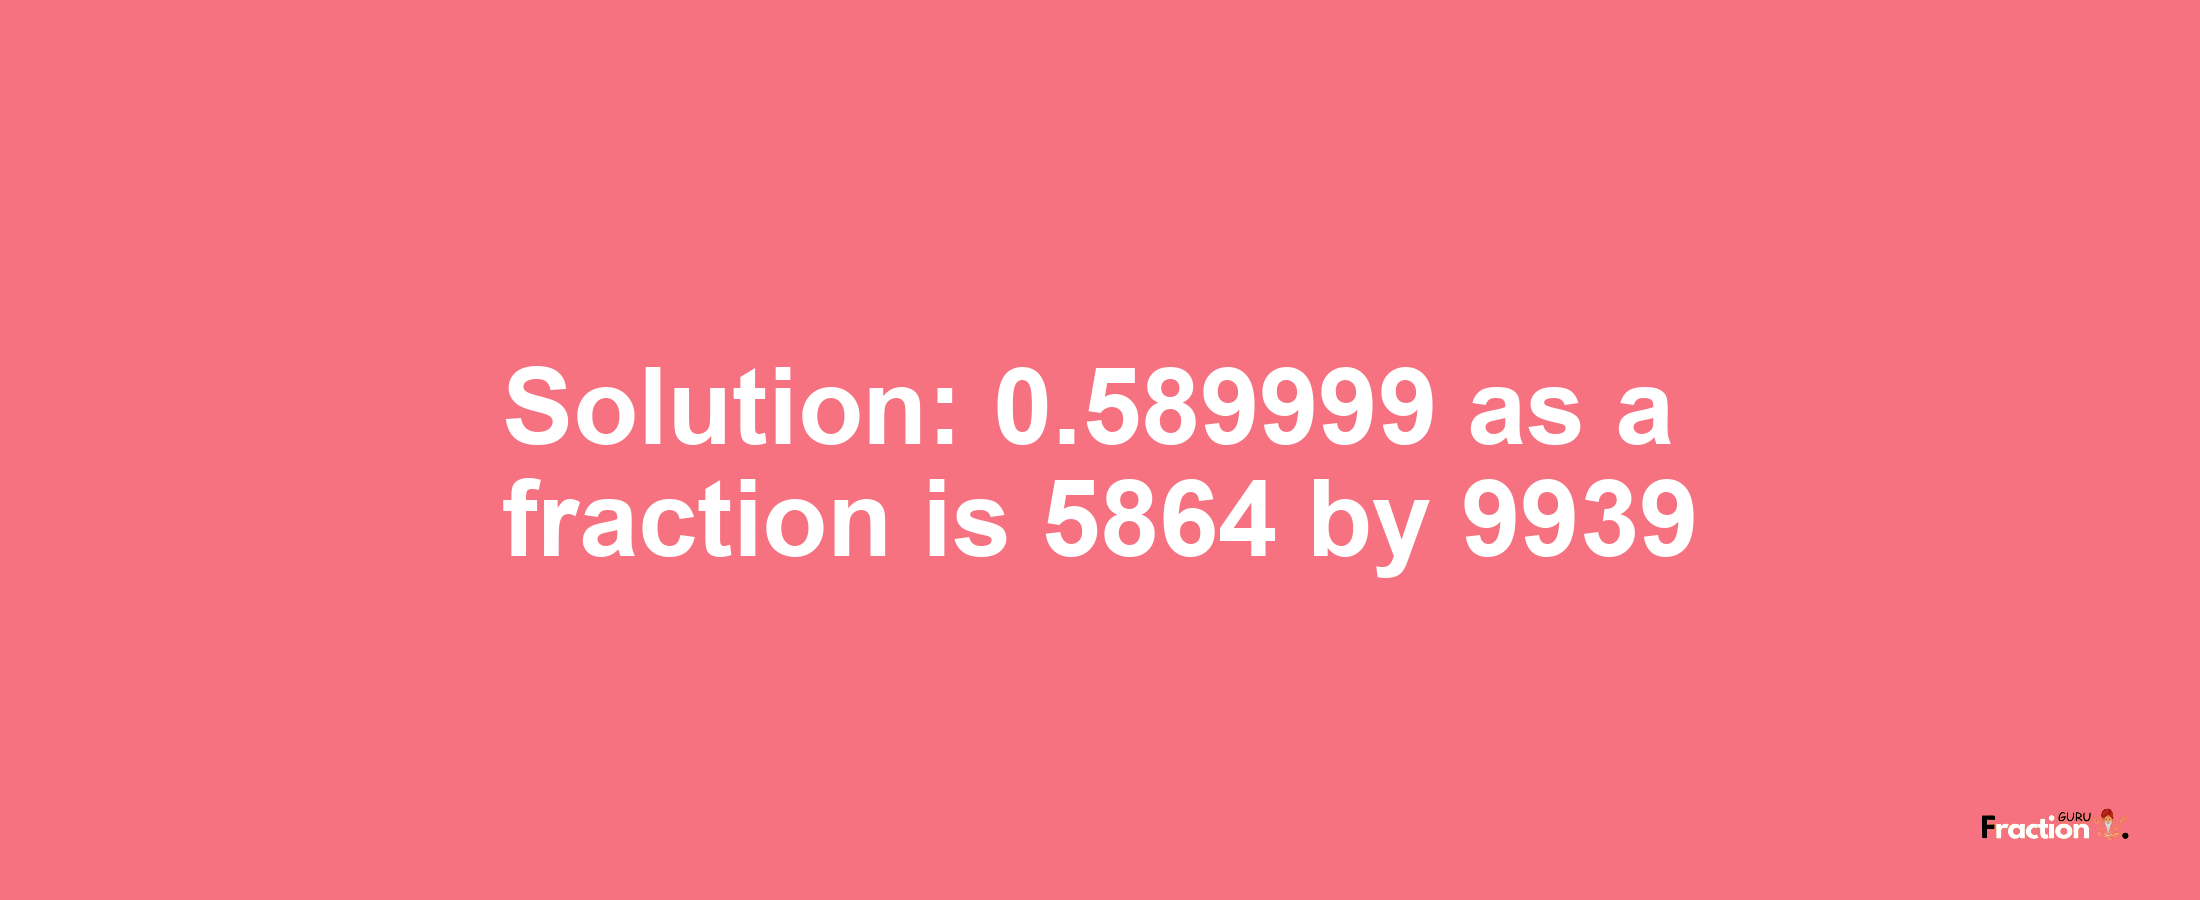 Solution:0.589999 as a fraction is 5864/9939